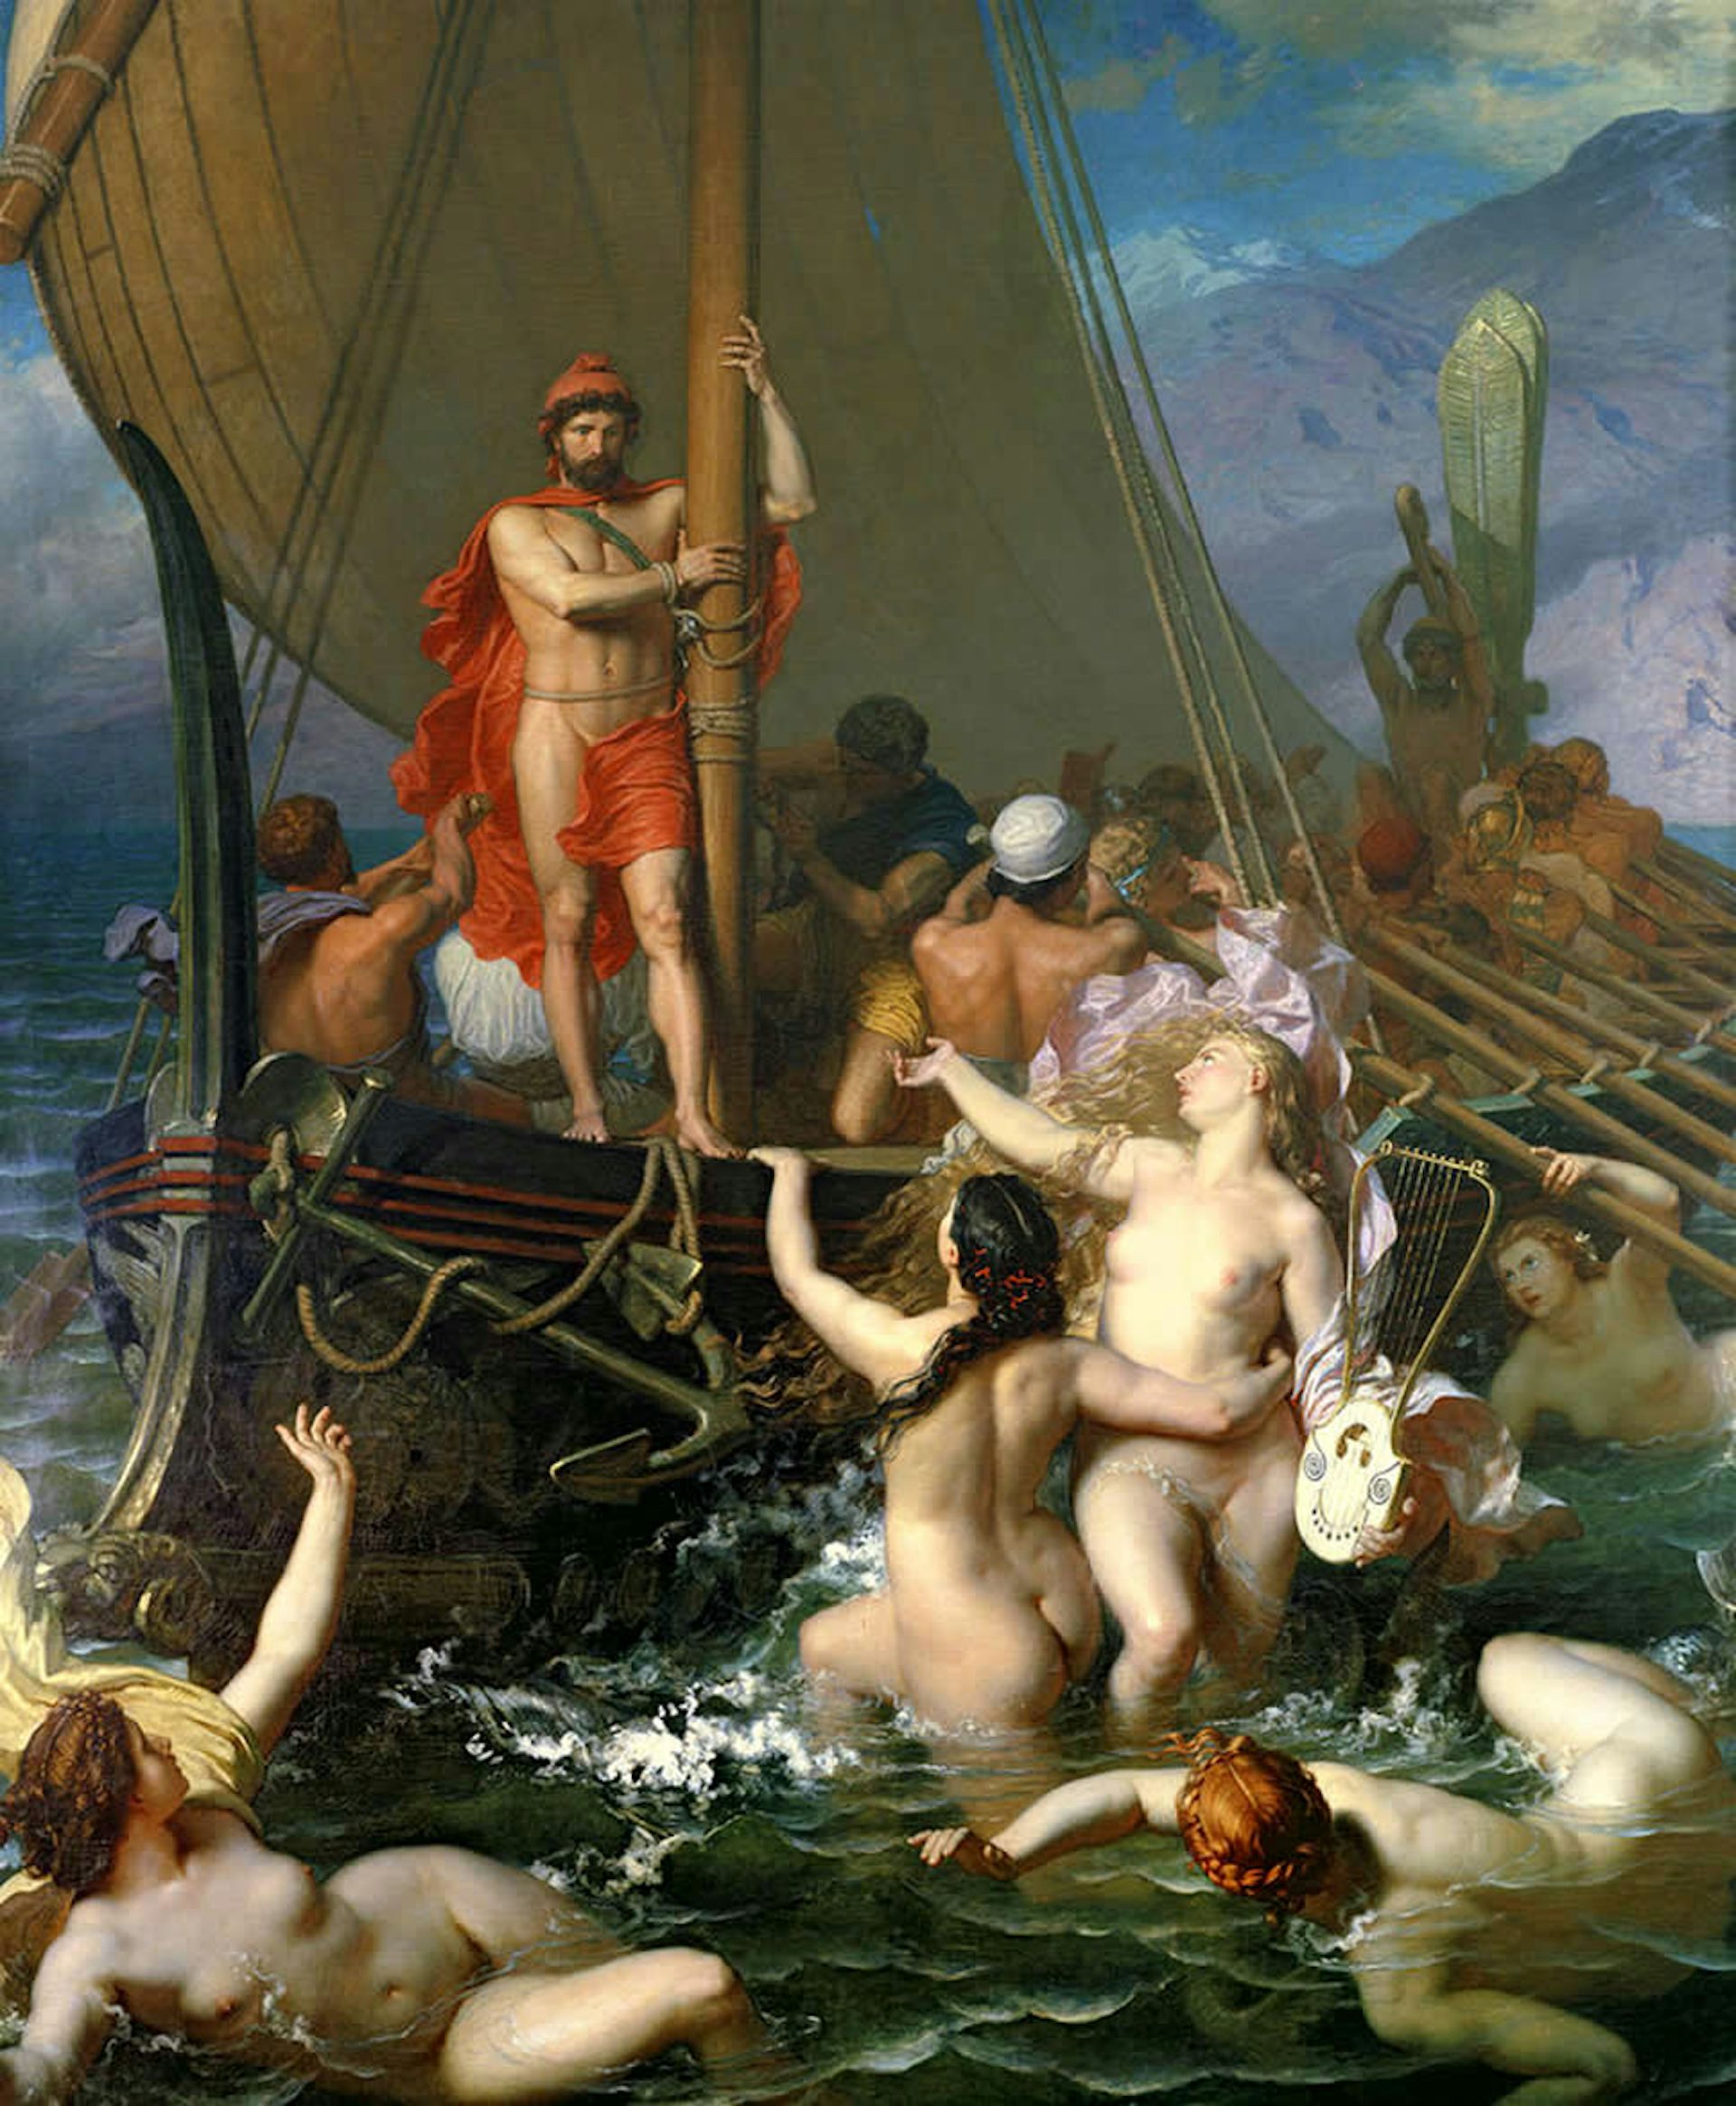 Ulysses and the Sirens by Léon Belly, 1867